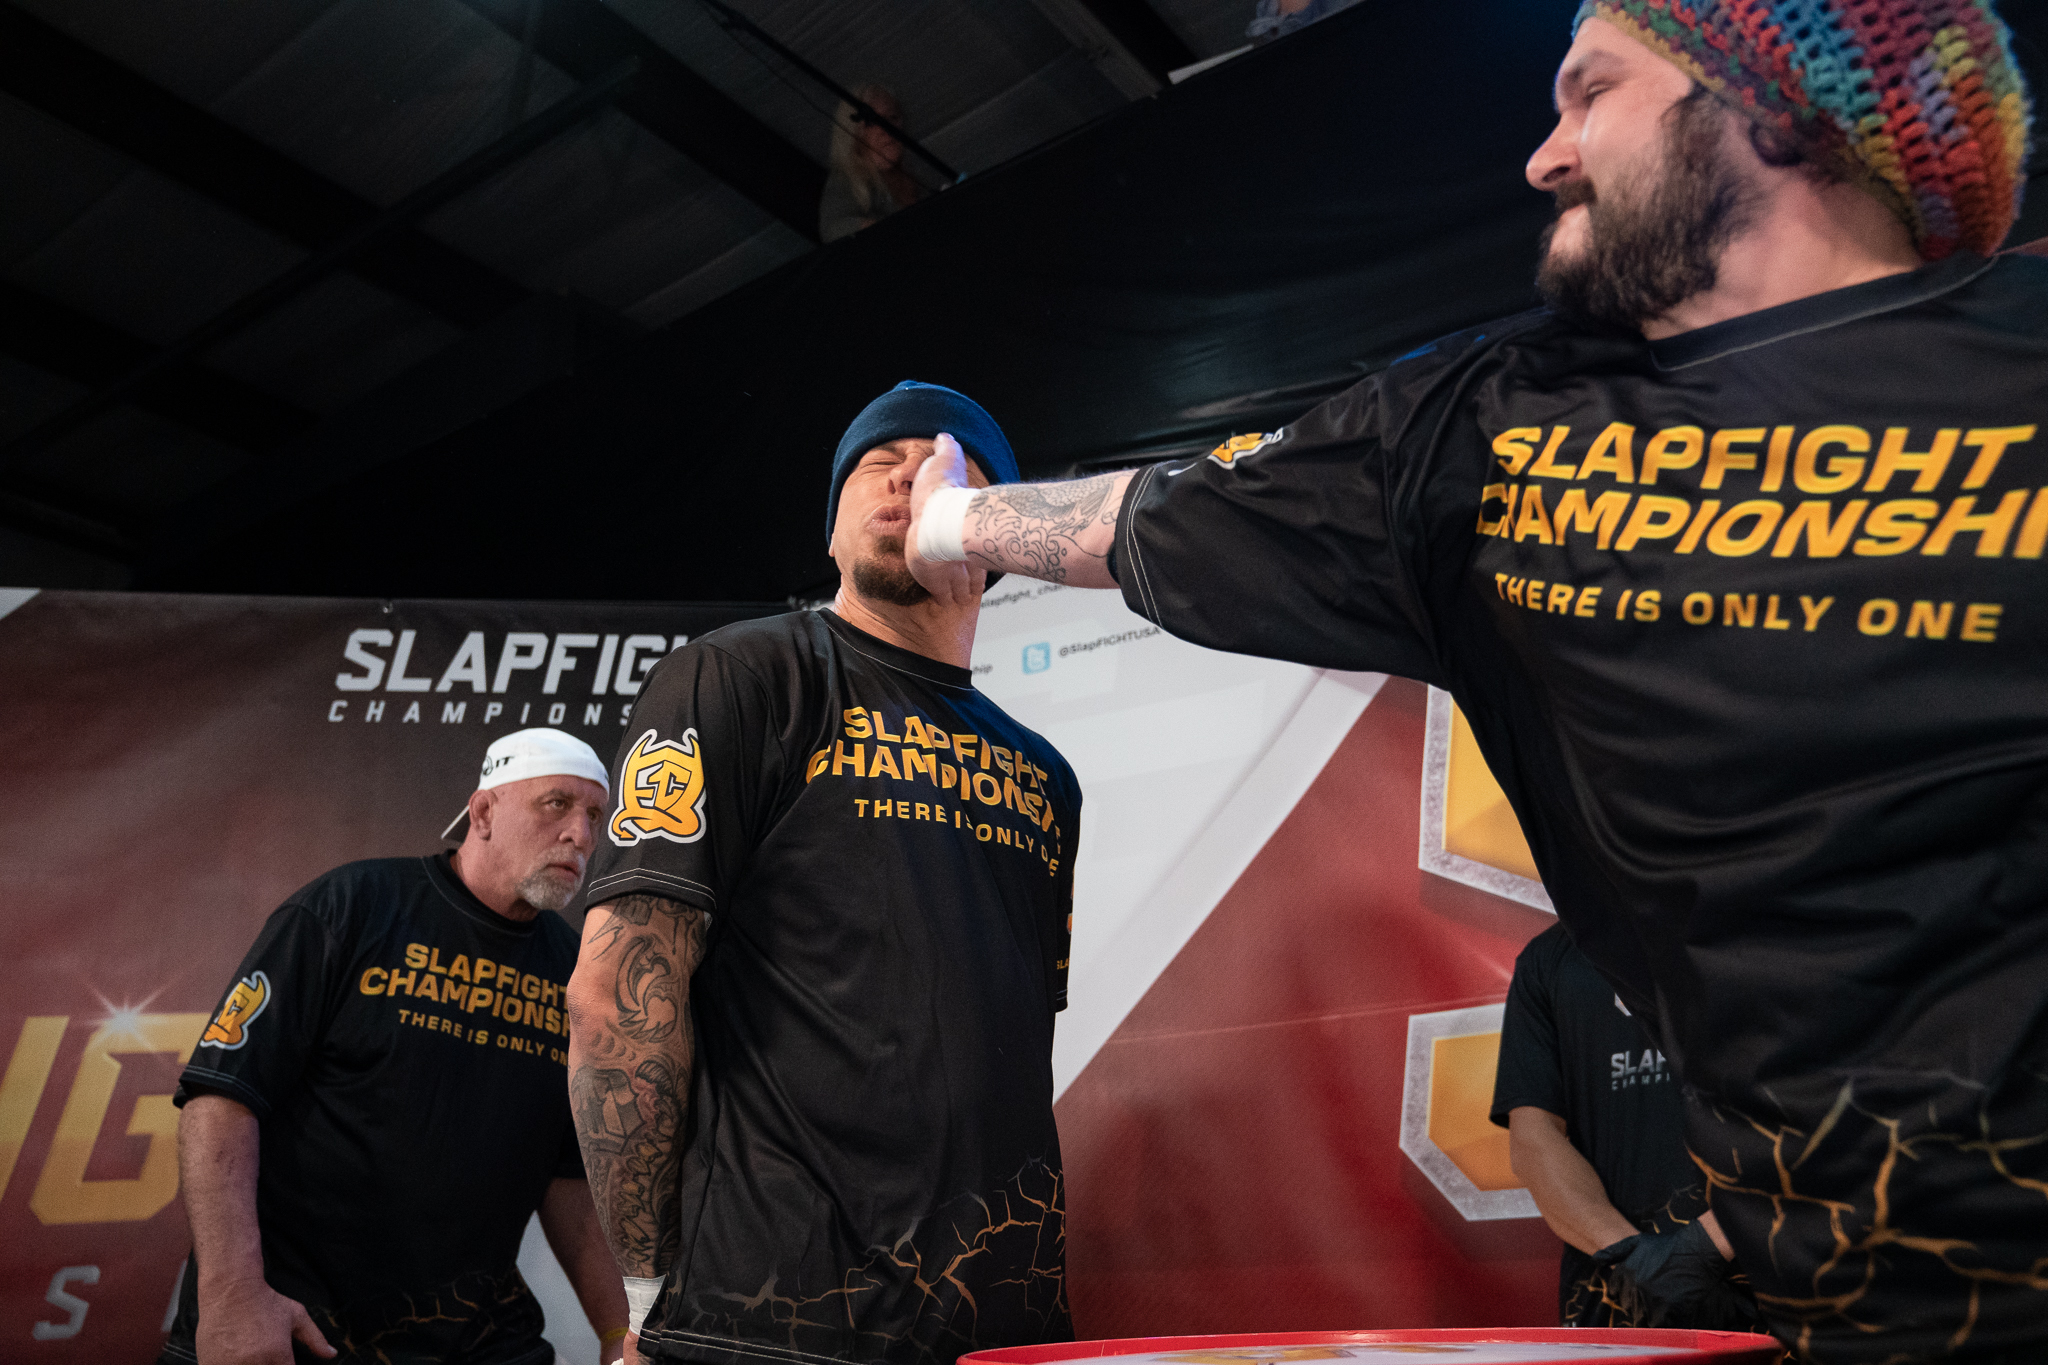 Biscuit (right) and Okuma 915 (left) during Slapfight Championship round. 